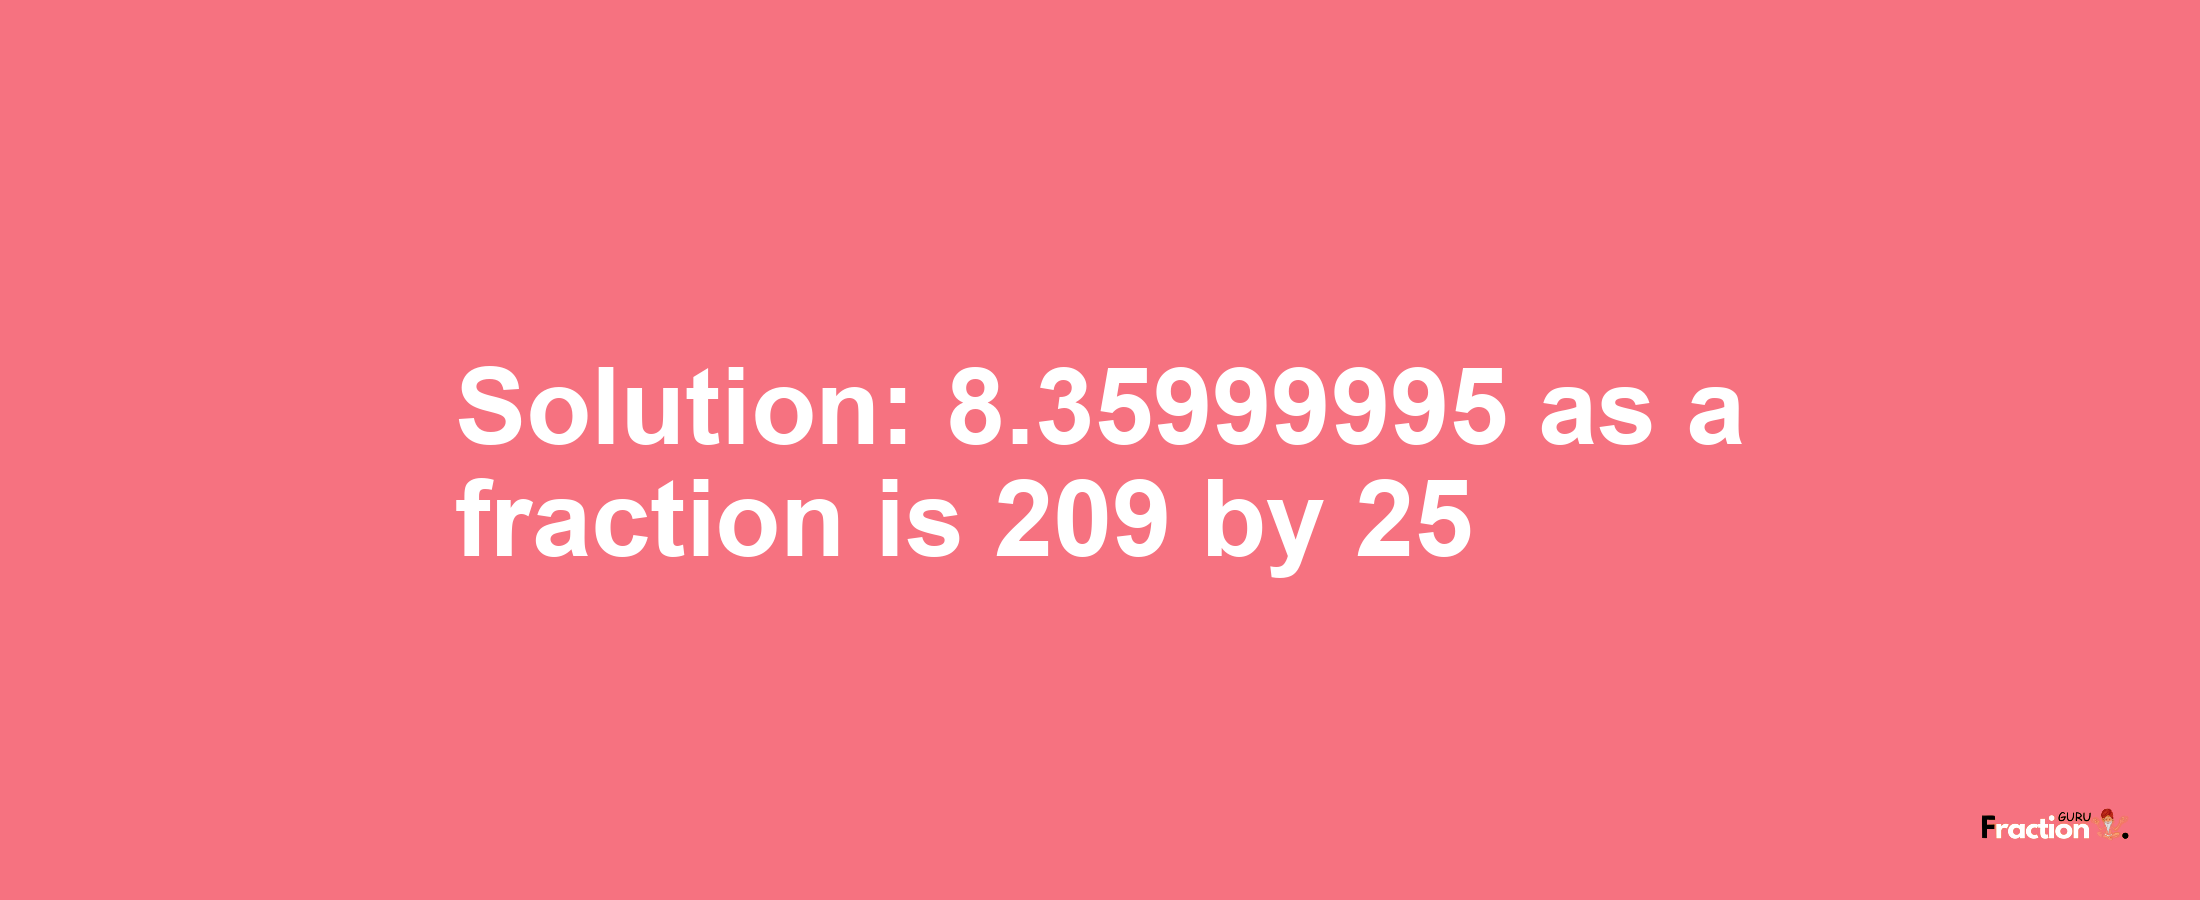 Solution:8.35999995 as a fraction is 209/25